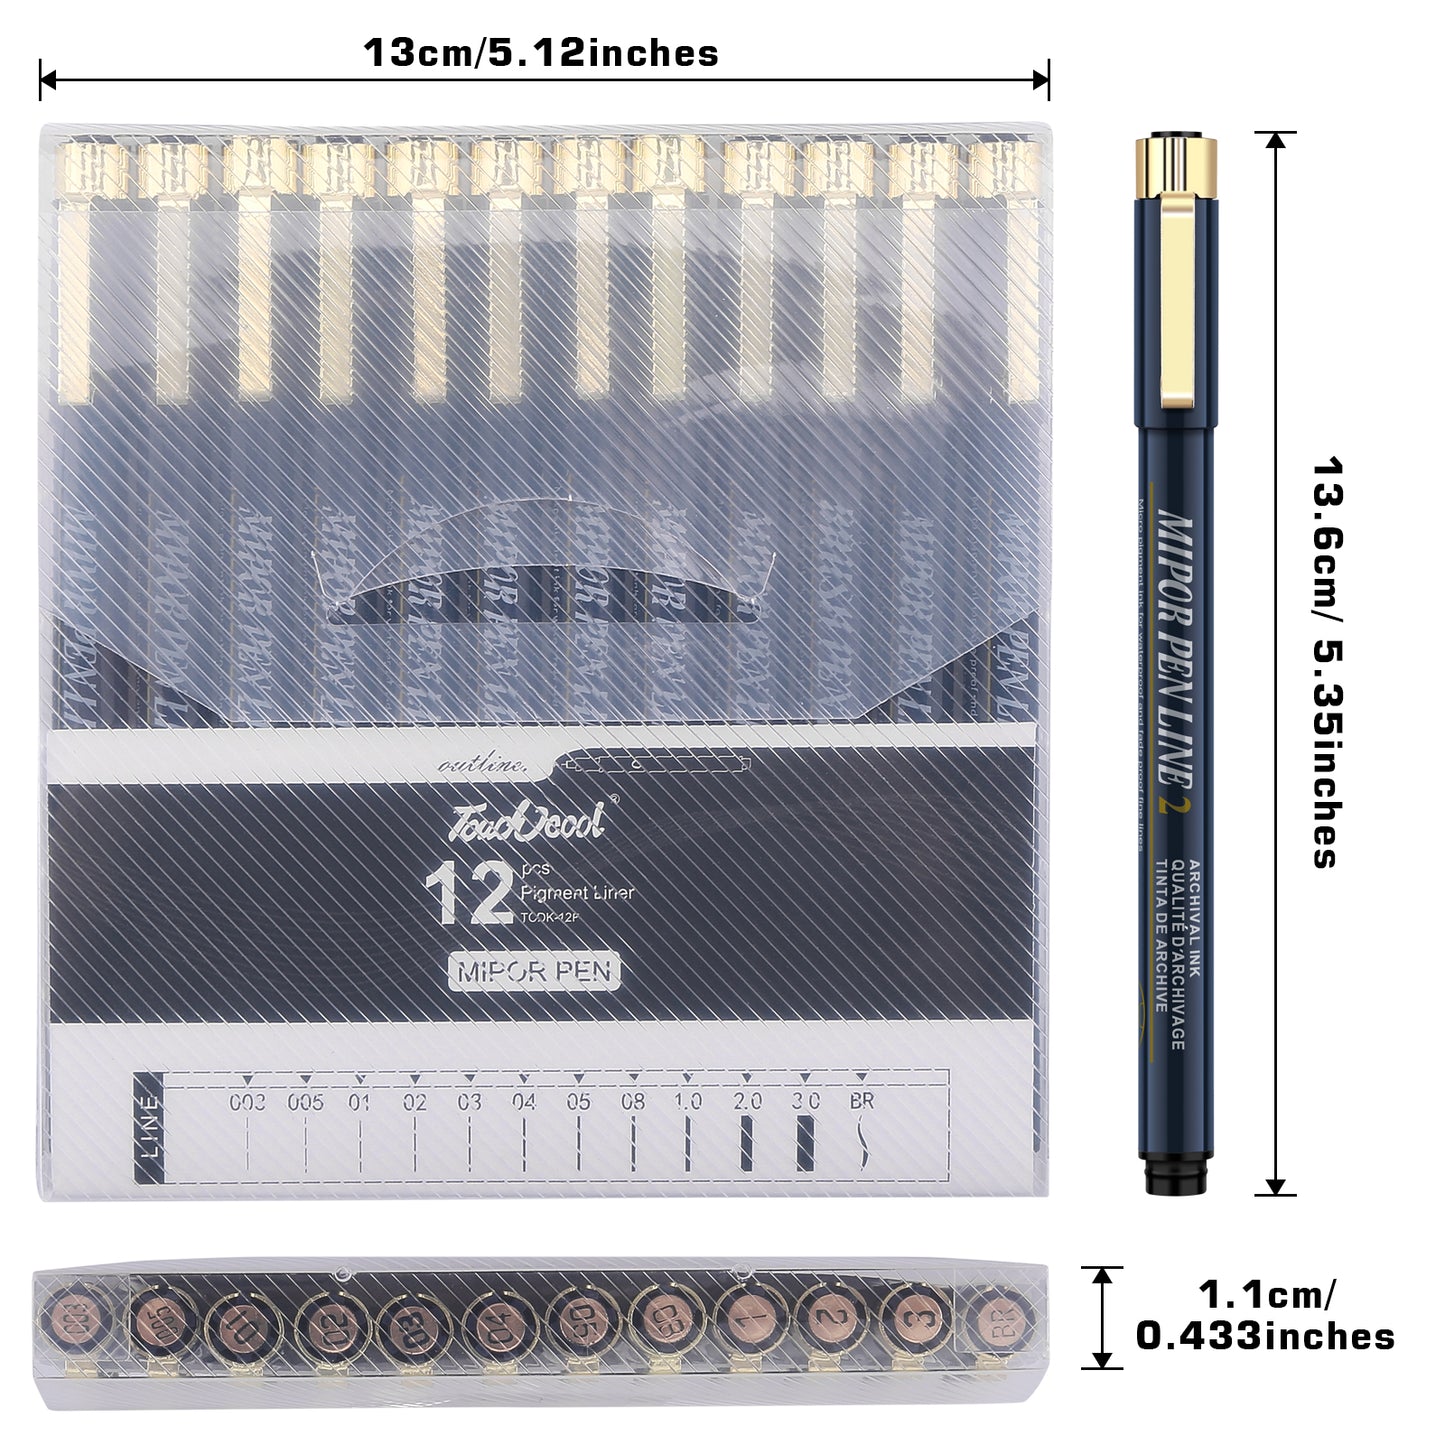 Drawing Pens, Limous 12 Sets FineLiner Drawing Pens 0.15mm to 0.5mm Micro Fine Point Drawing Pens, Pigment Ink Pens for Illustration, Sketching, Art Watercolor, Manga, Calligraphy and Scrapbooking